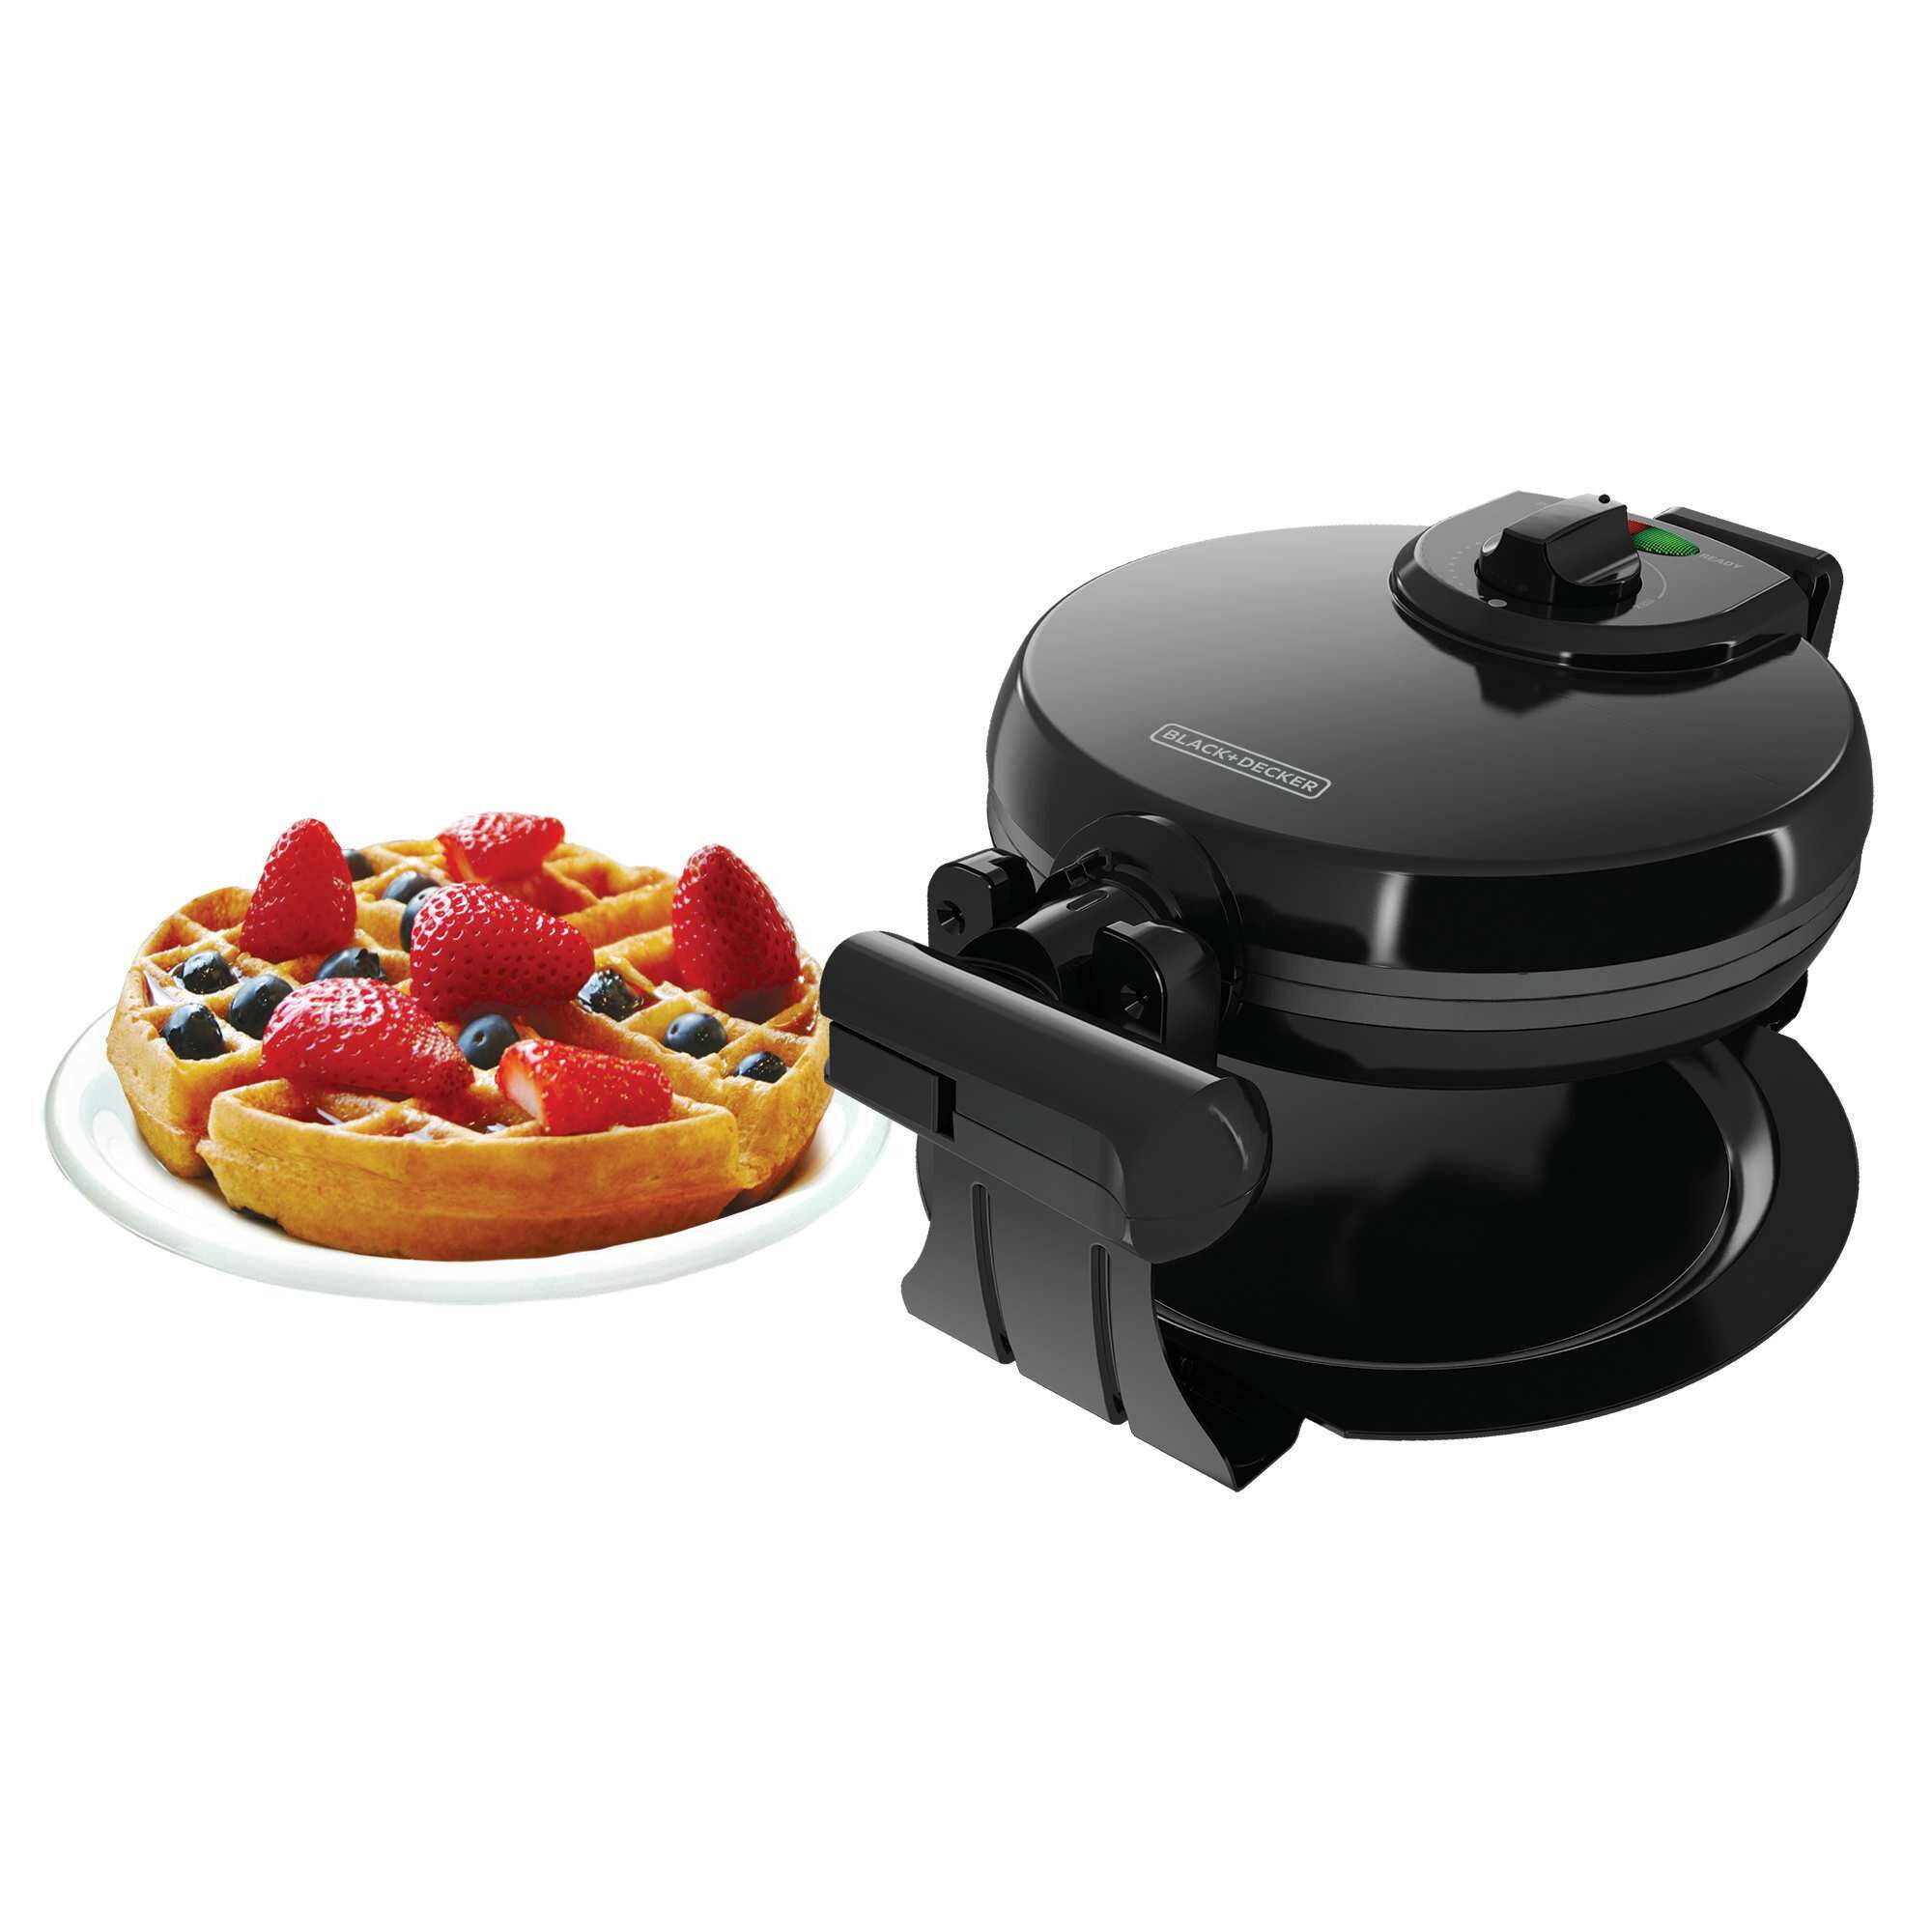 Belgian waffle maker with waffles and berries.